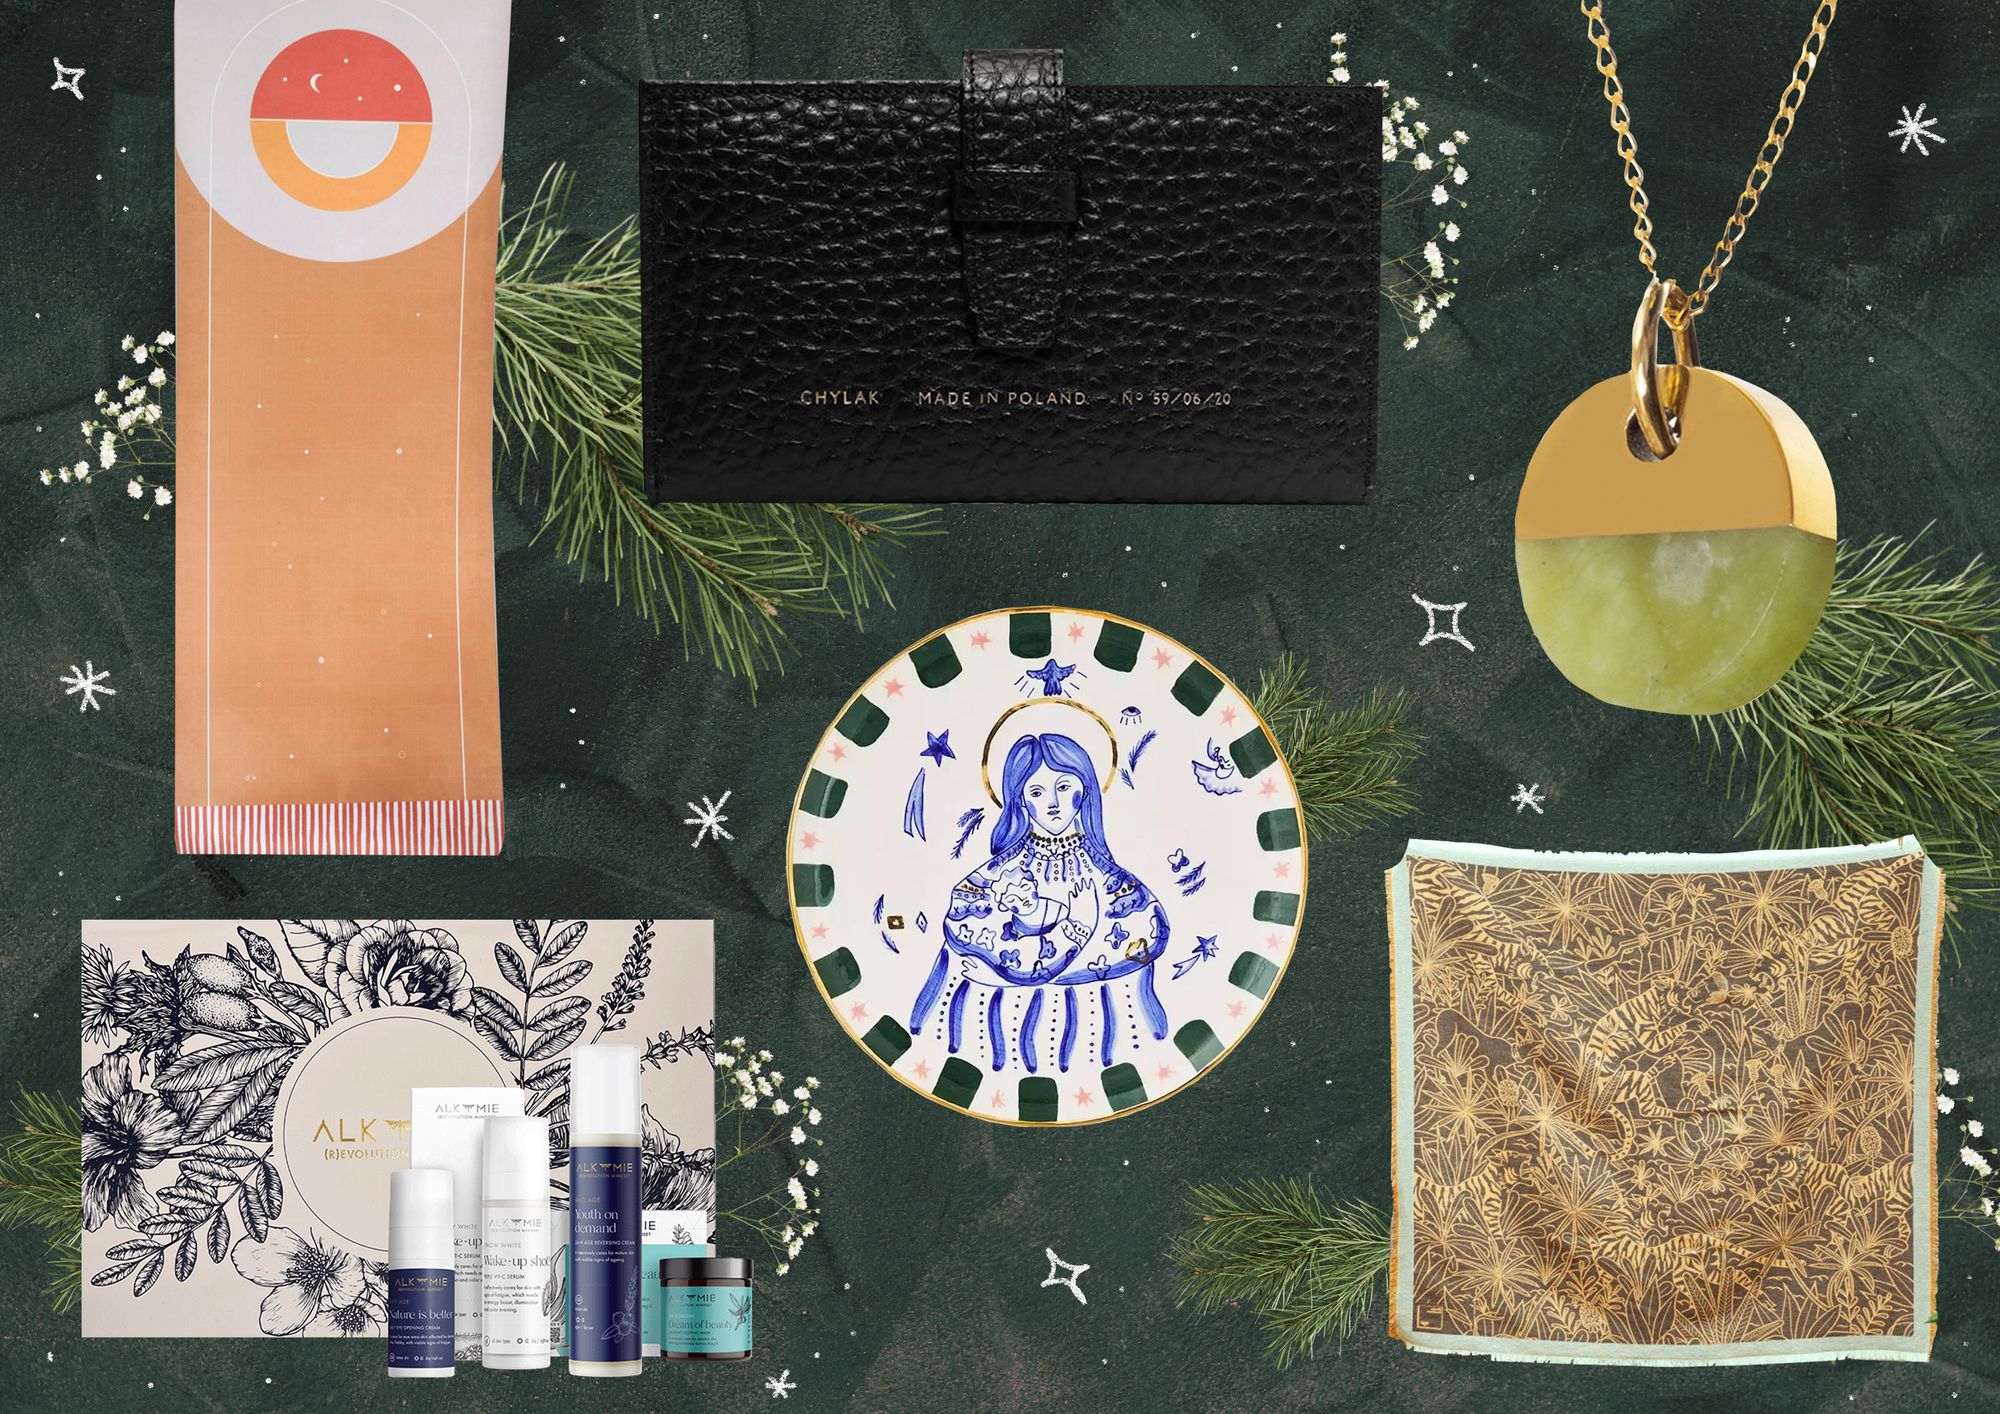 Express your appreciation with a gift | Regional Gift Guide—mom edition